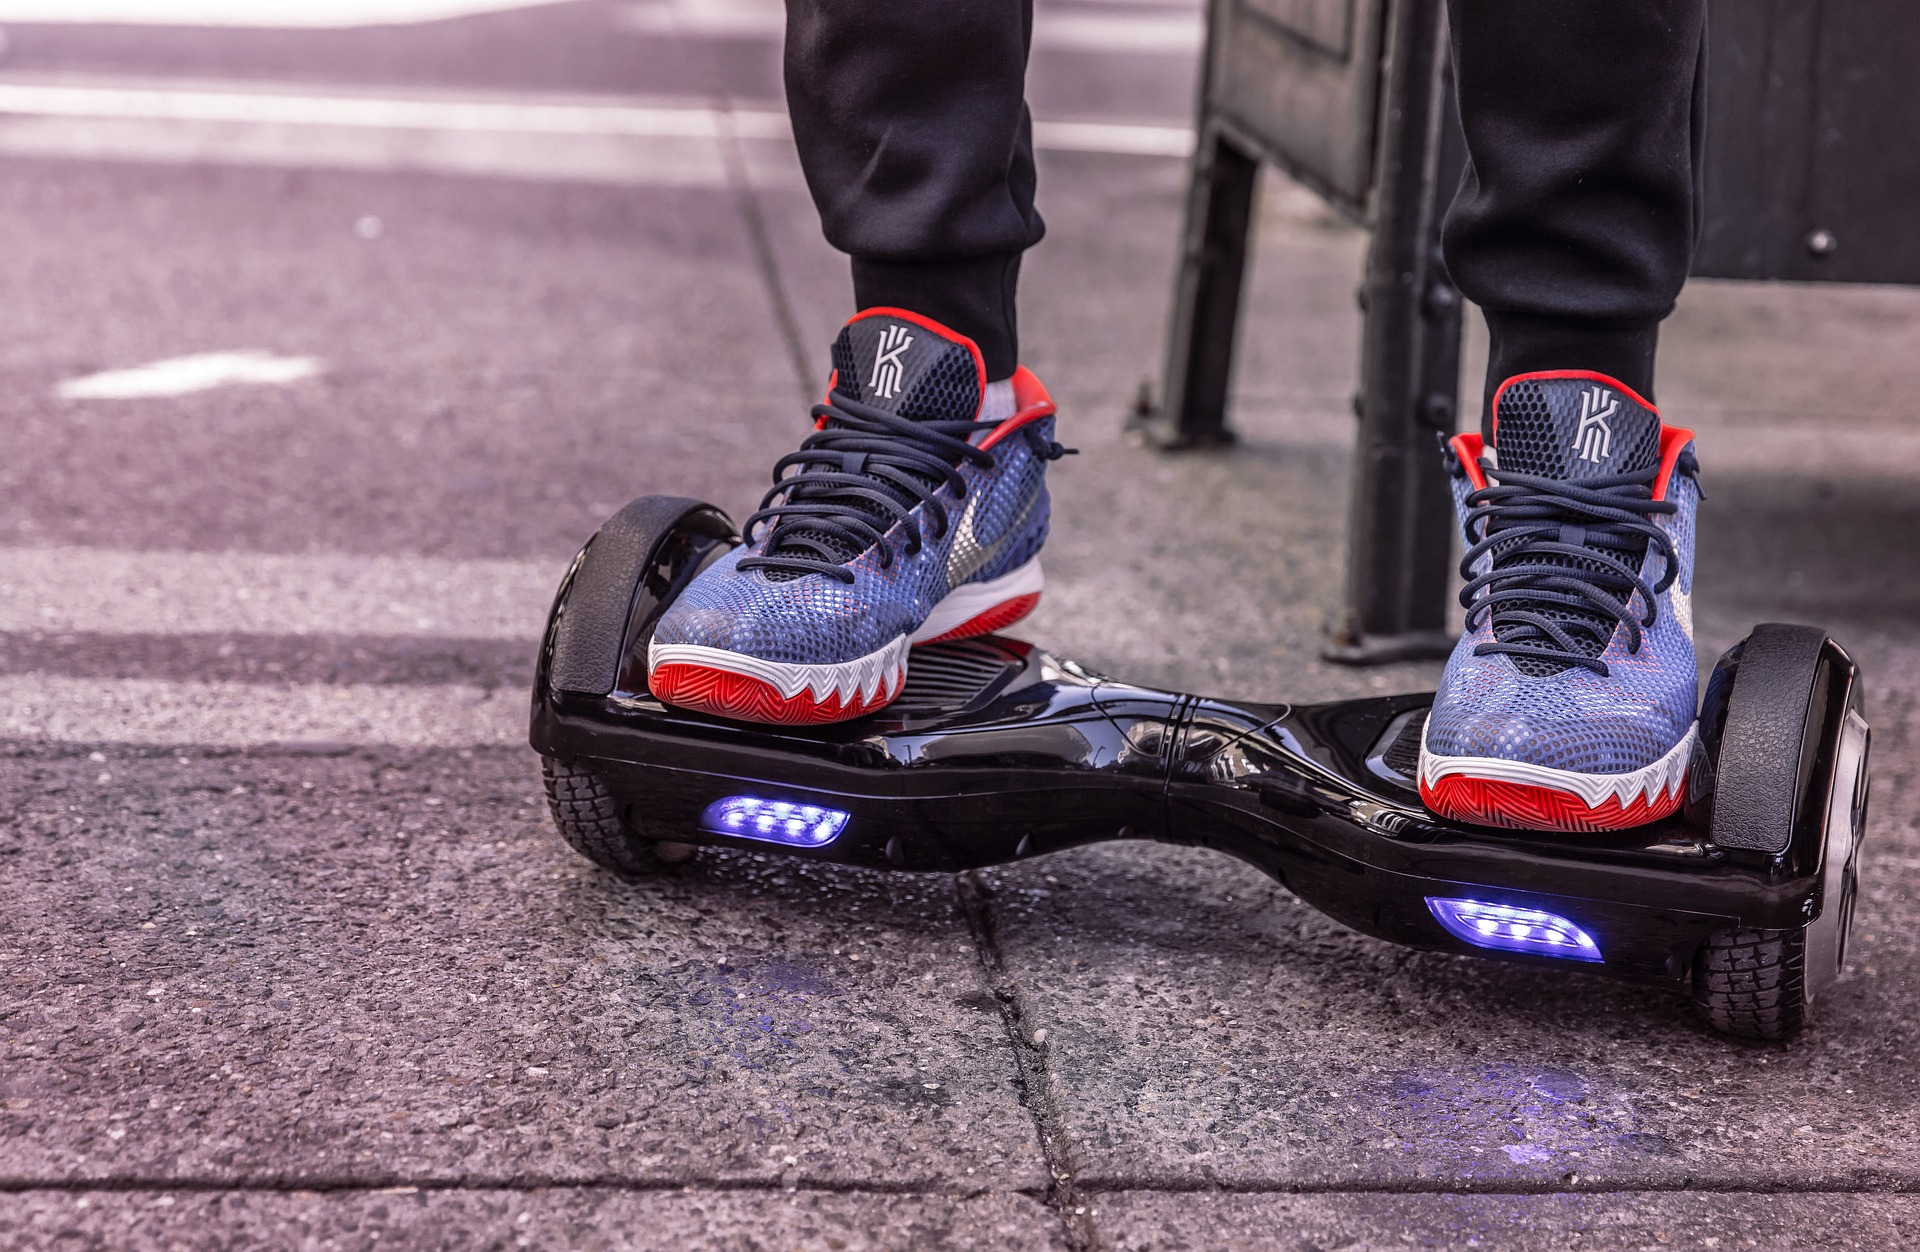 14. Hoverboard Self-Balancing Scooter